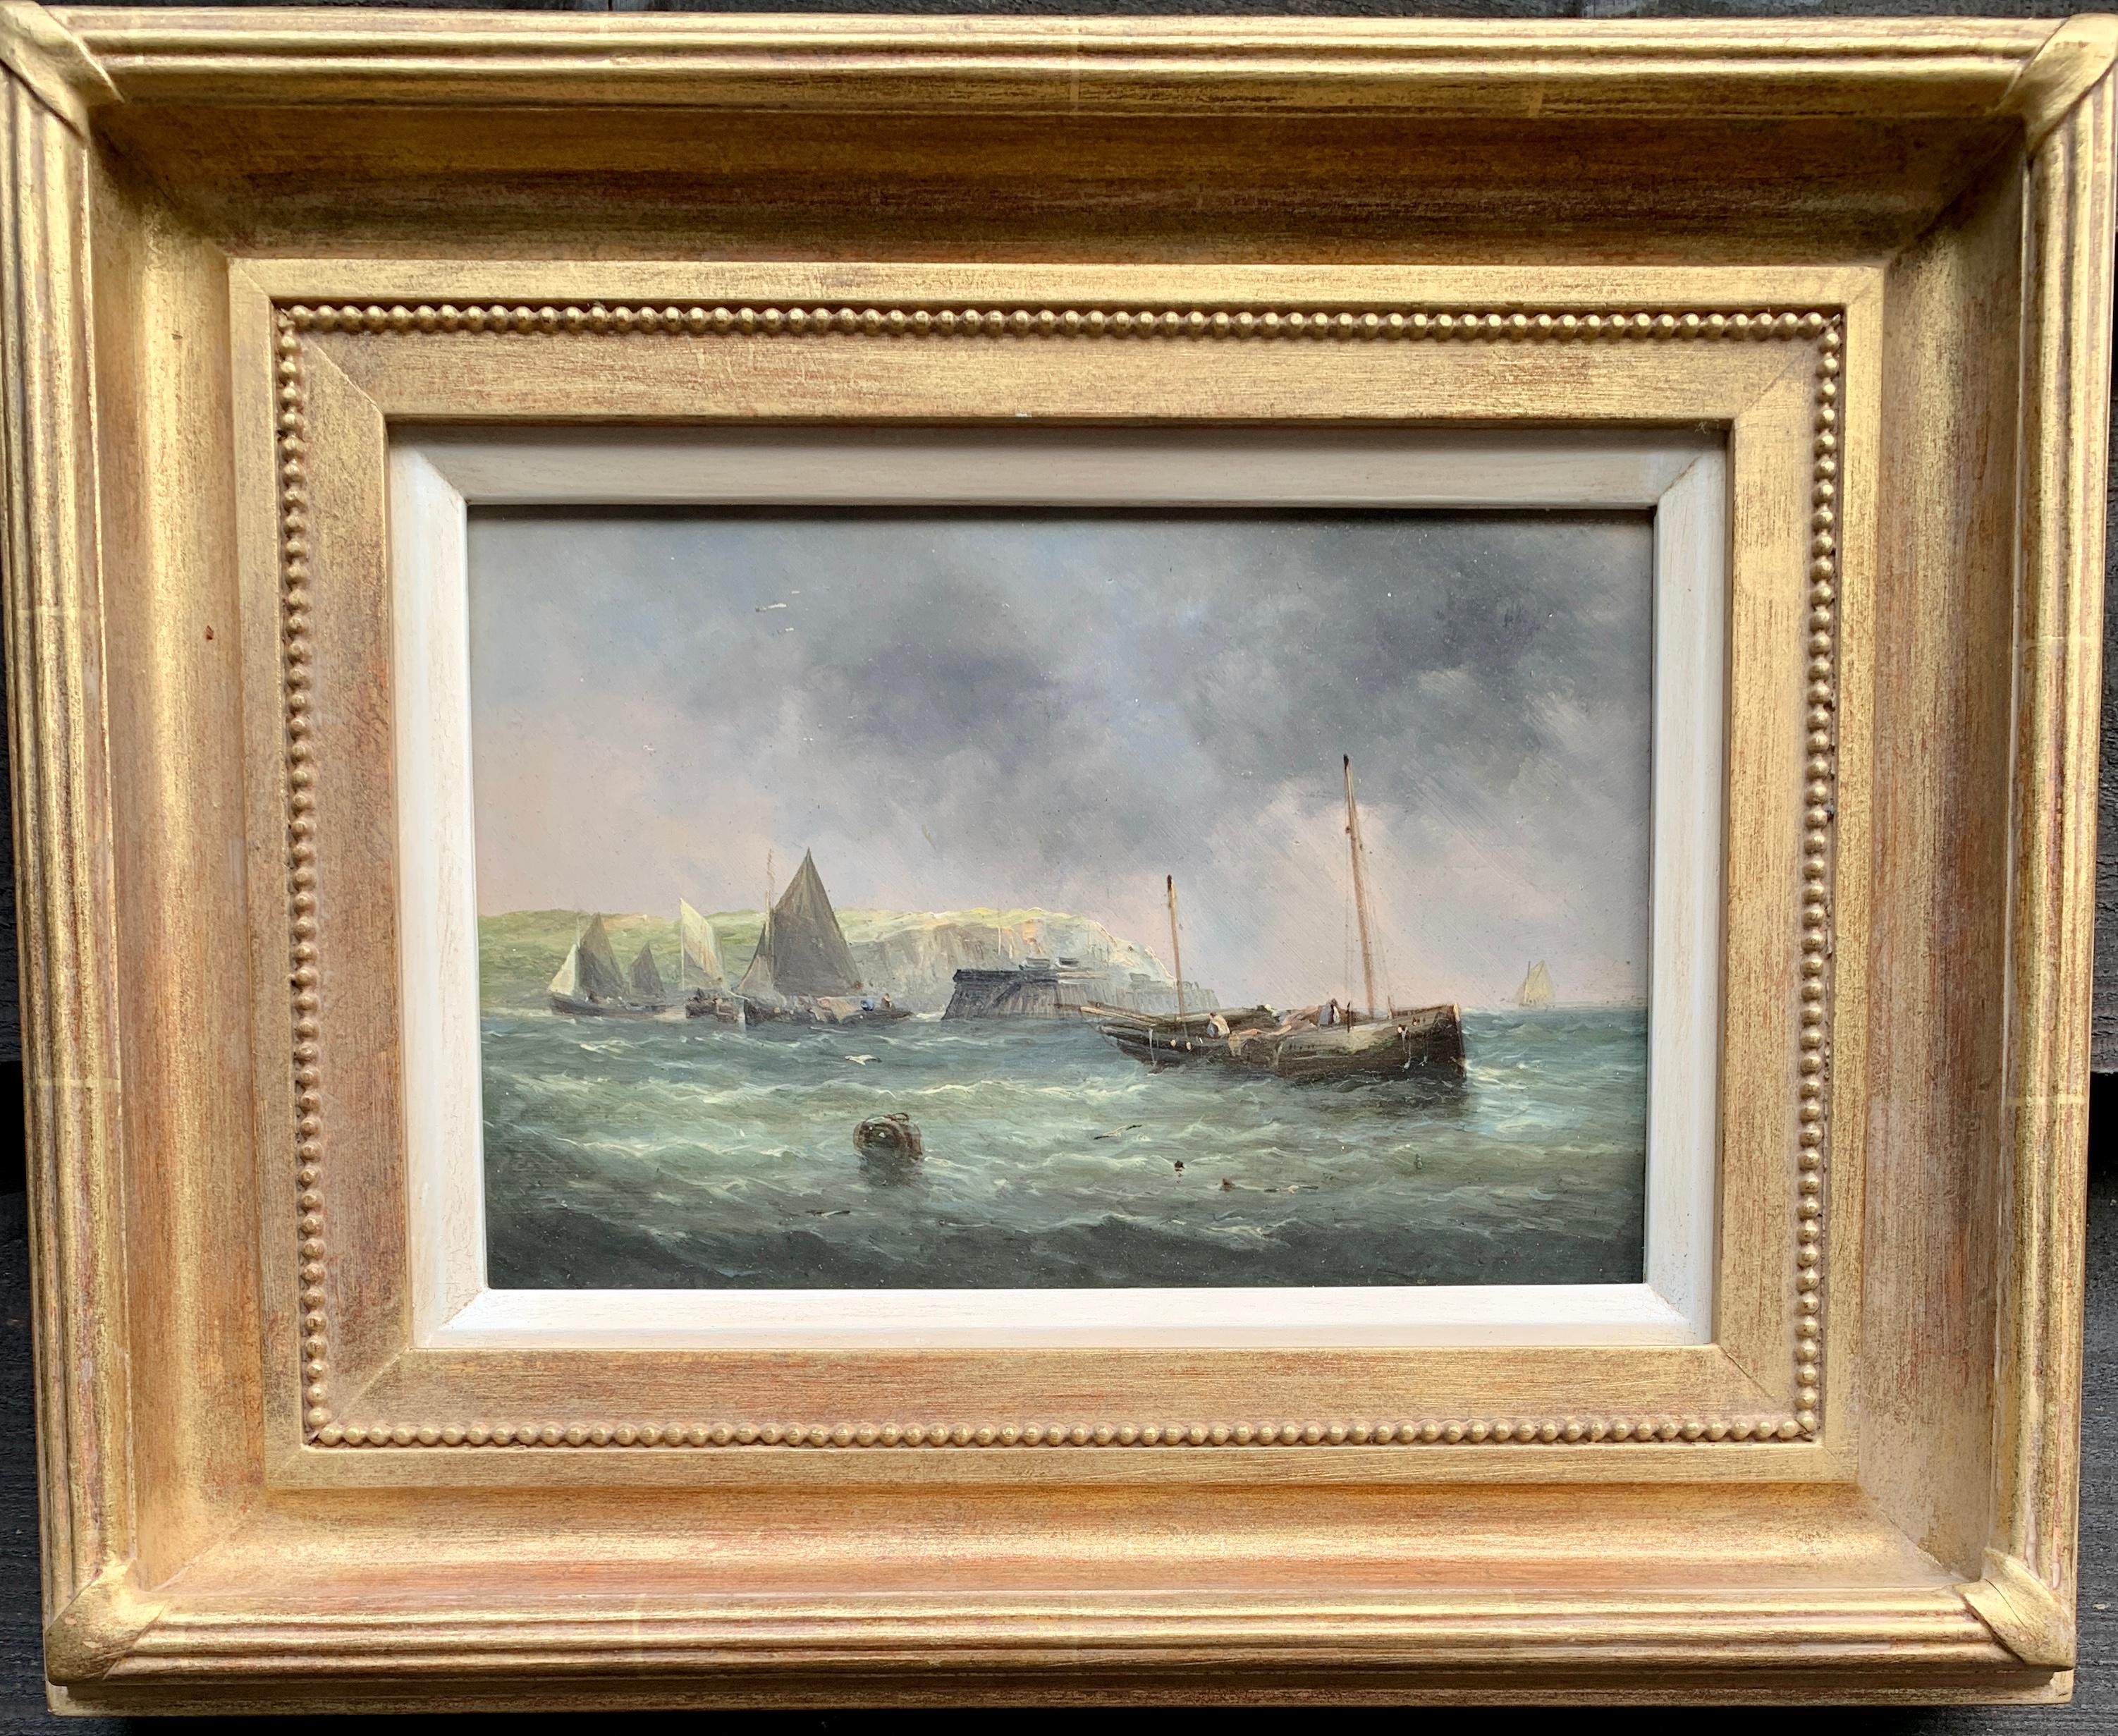 19th century antique English fishing boats by the White Cliffs of Dover